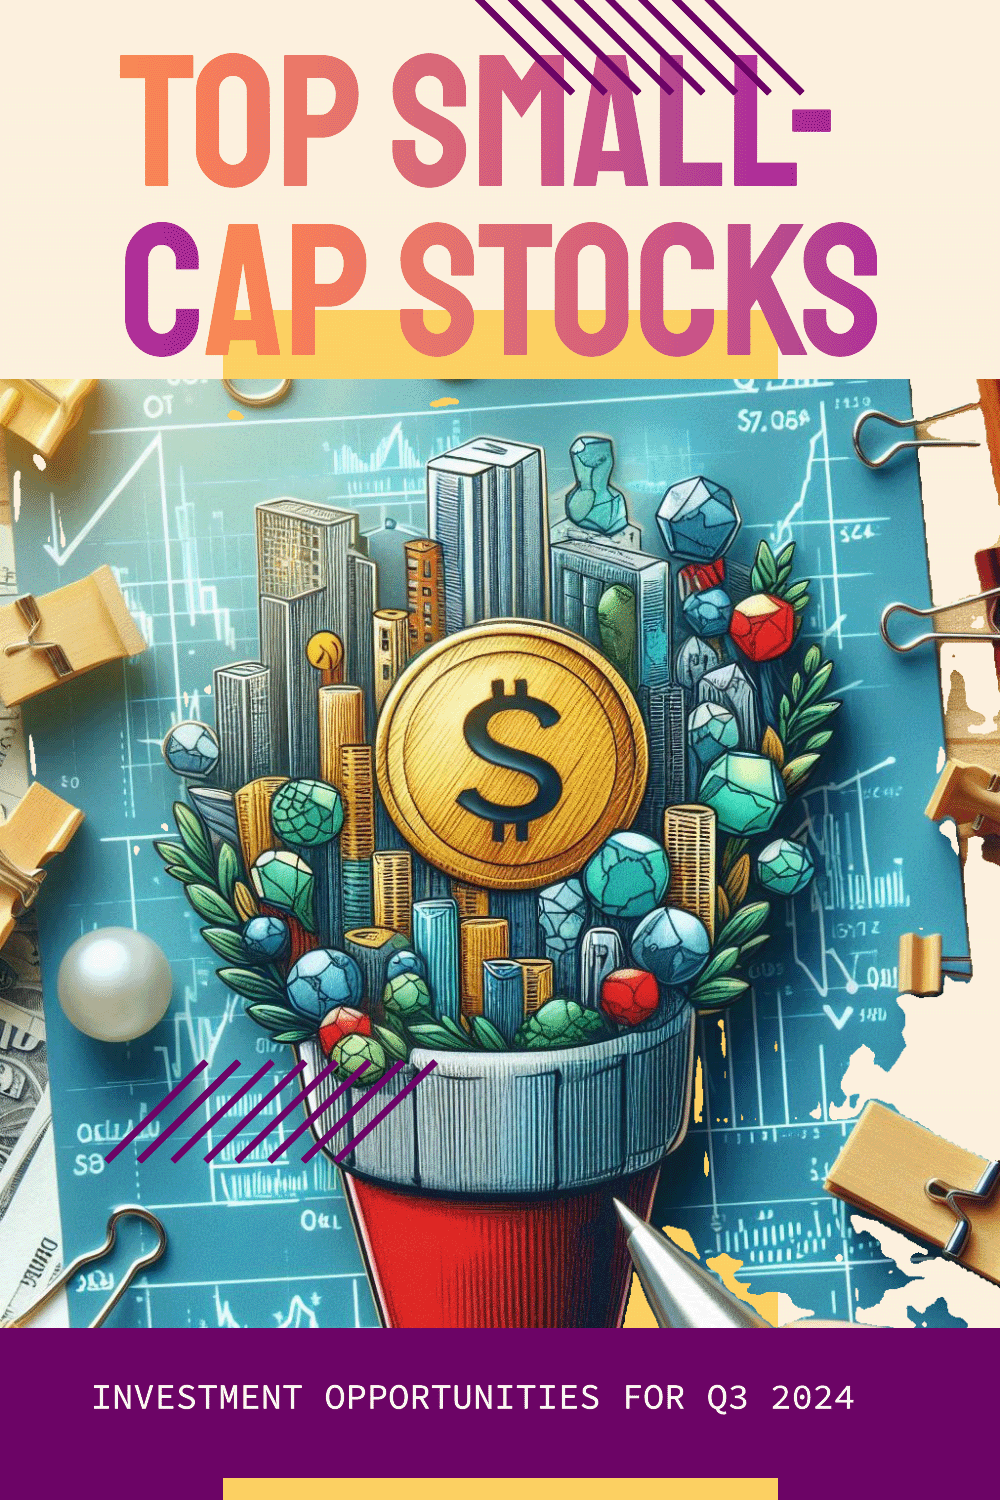 Best small-cap stocks to invest in Q3 2024